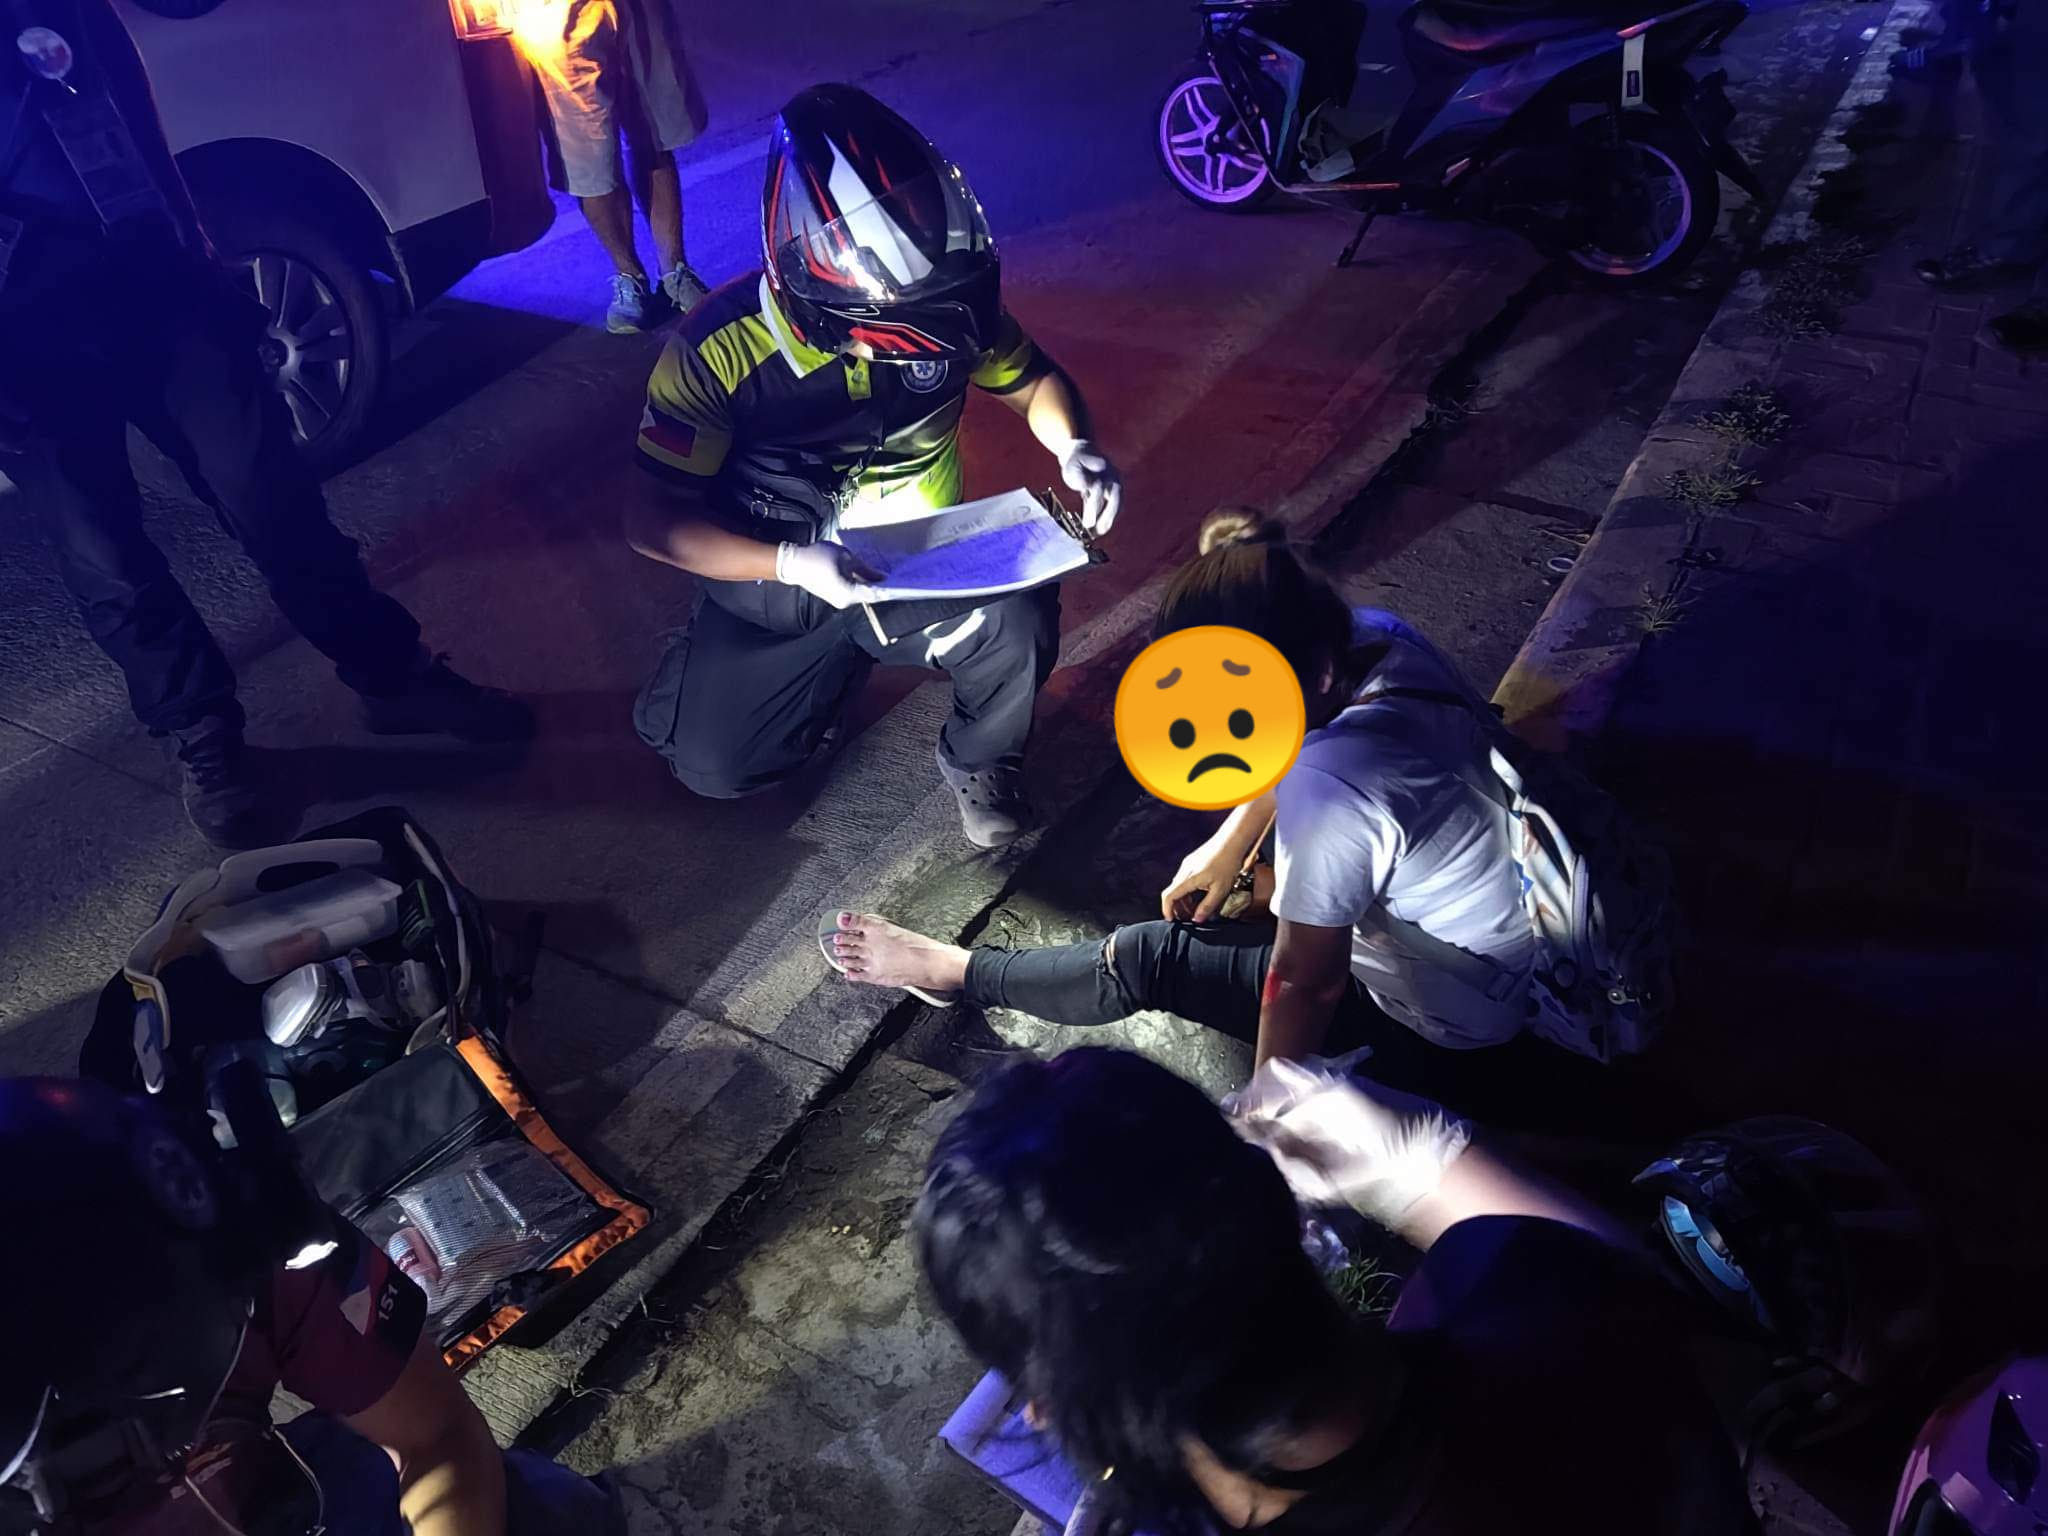 EMR Raptor volunteer responded road accident involving motorcycle self inflicted – Mario Eleno Canoy Jr.